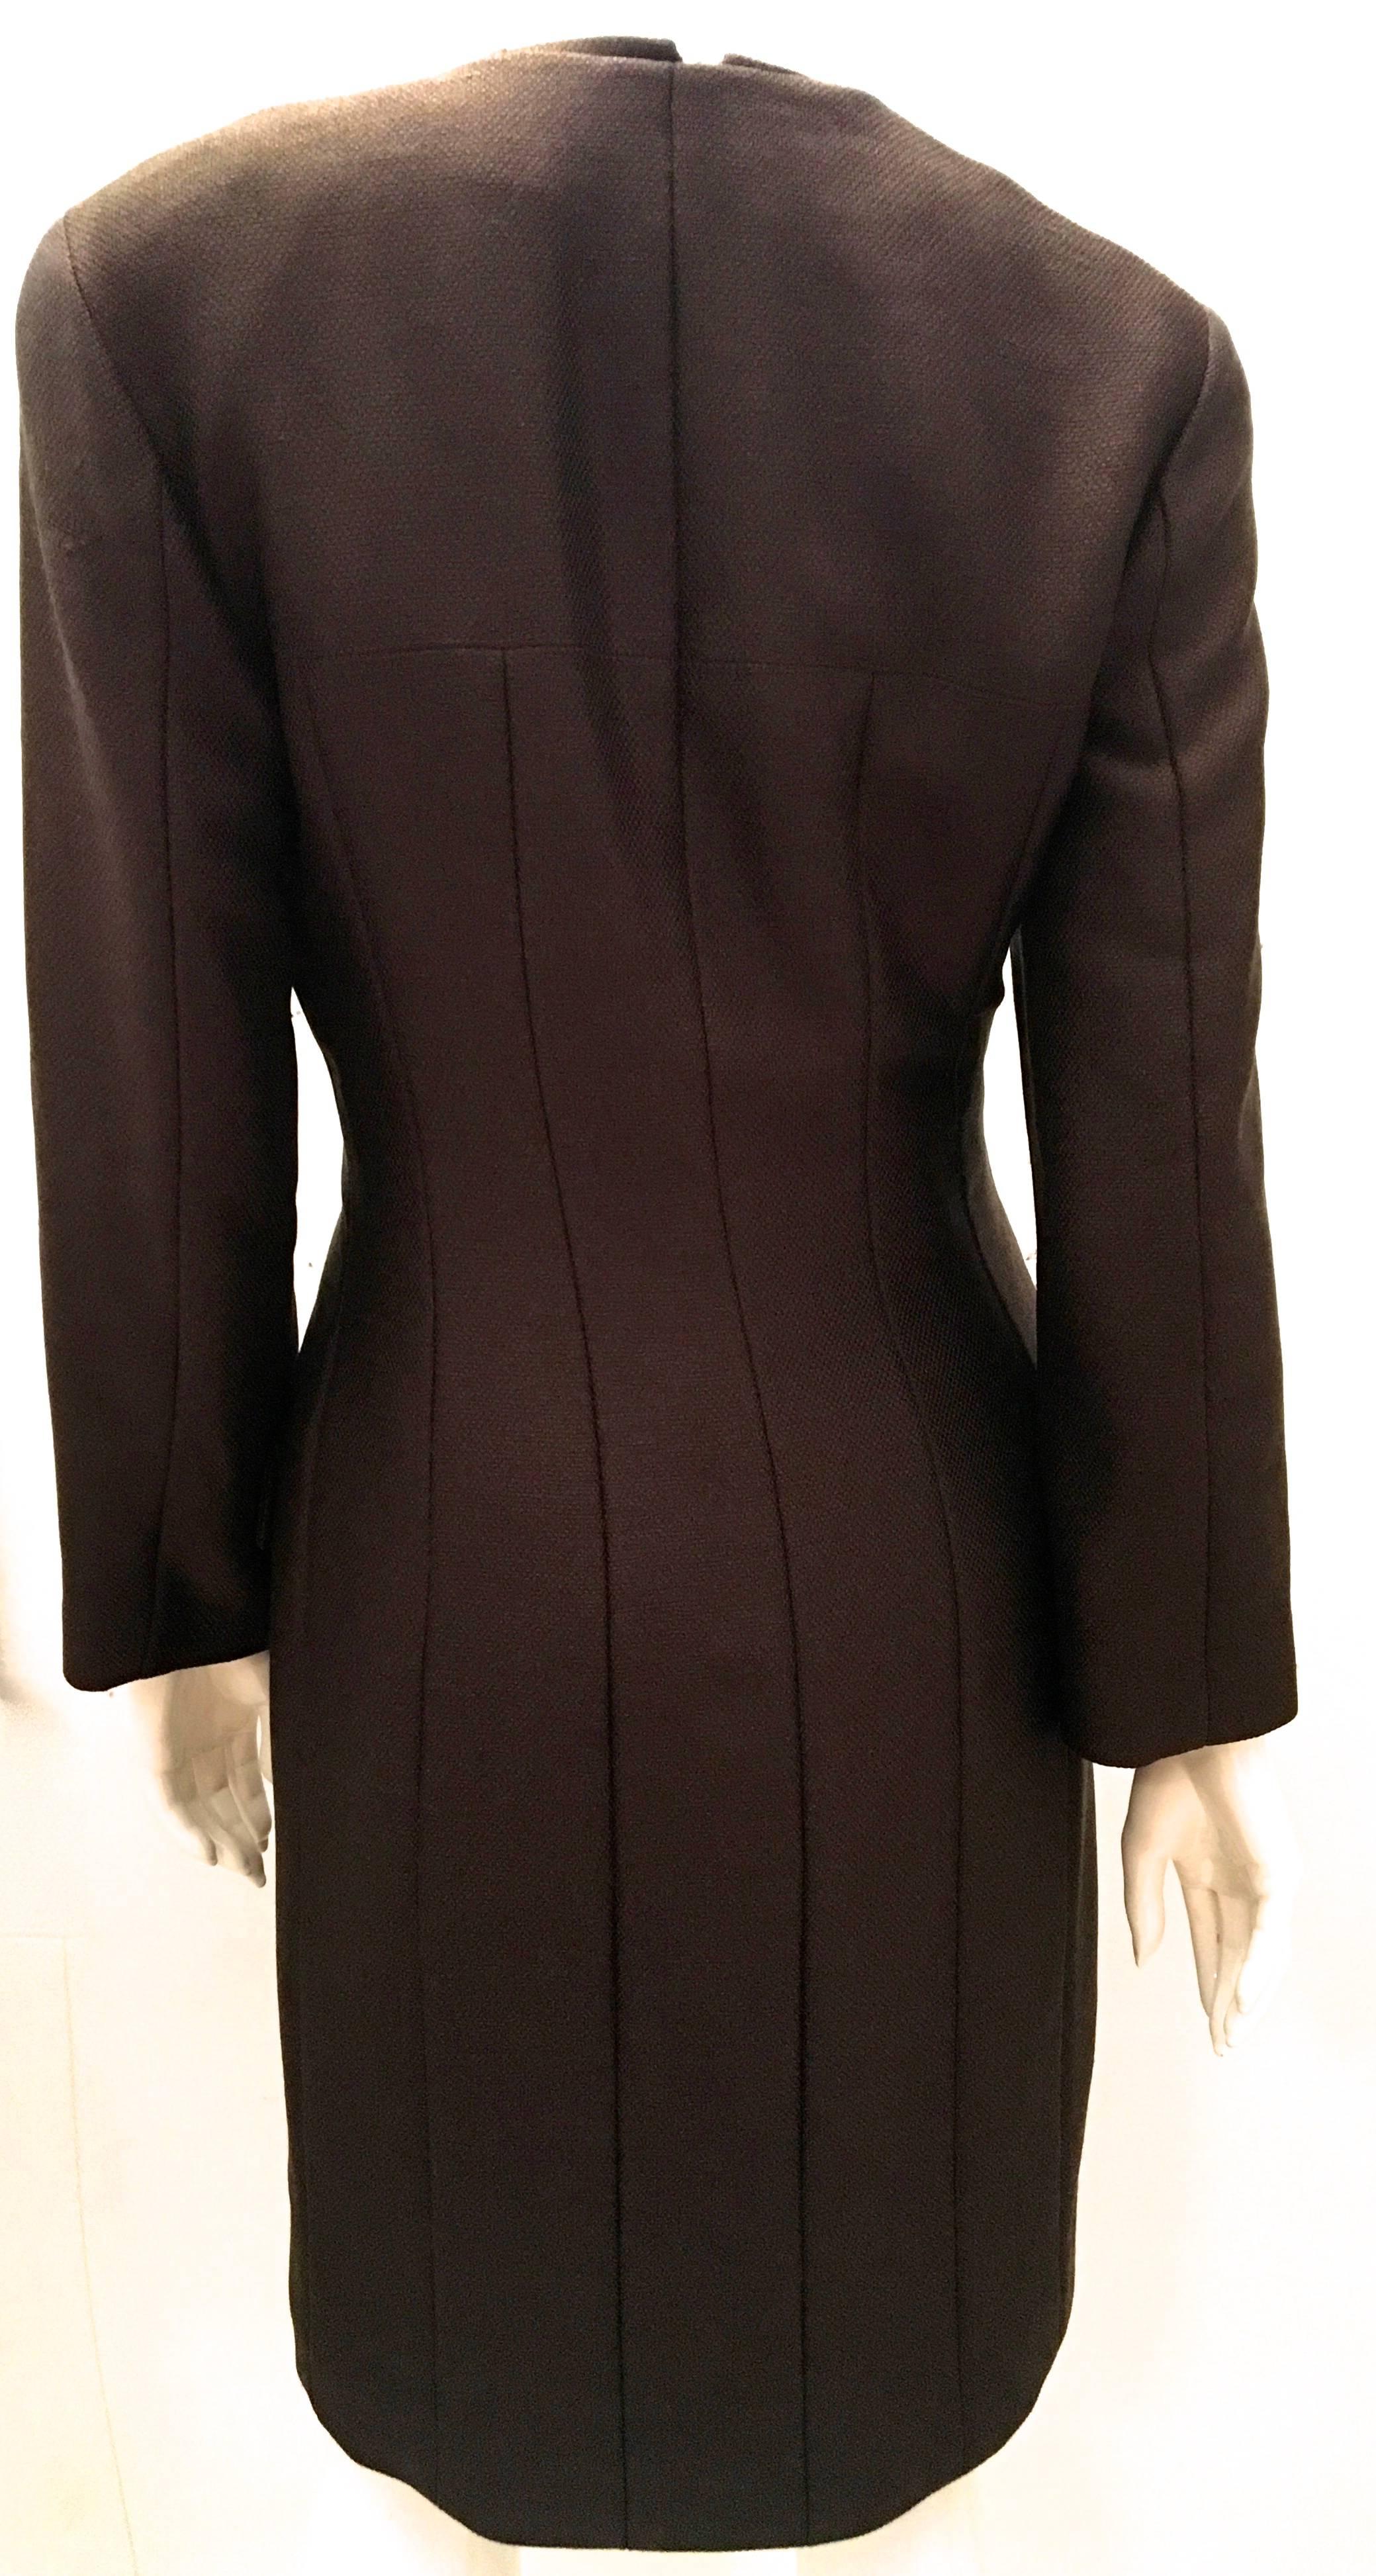 Chanel Coat w/ Matching Dress - Mint Condition - Absolutely Flawless For Sale 1